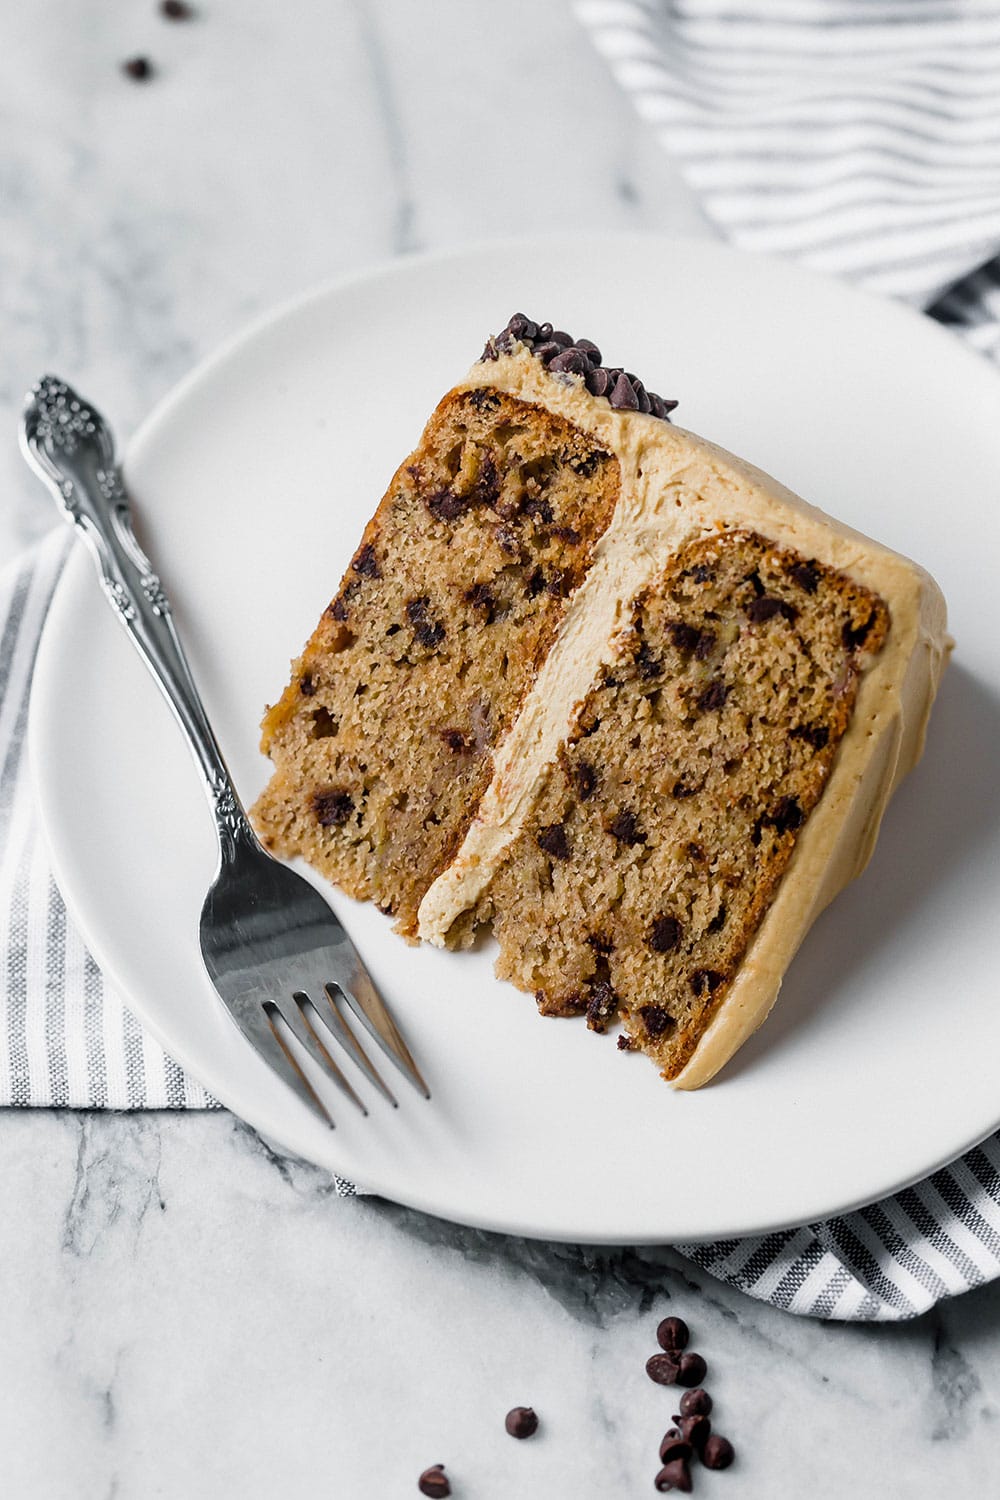 Bursting with sweet flavors, Banana Chocolate Chip Cake with Peanut Butter Frosting is a huge crowd-pleaser and better than any store-bought cake. Love!